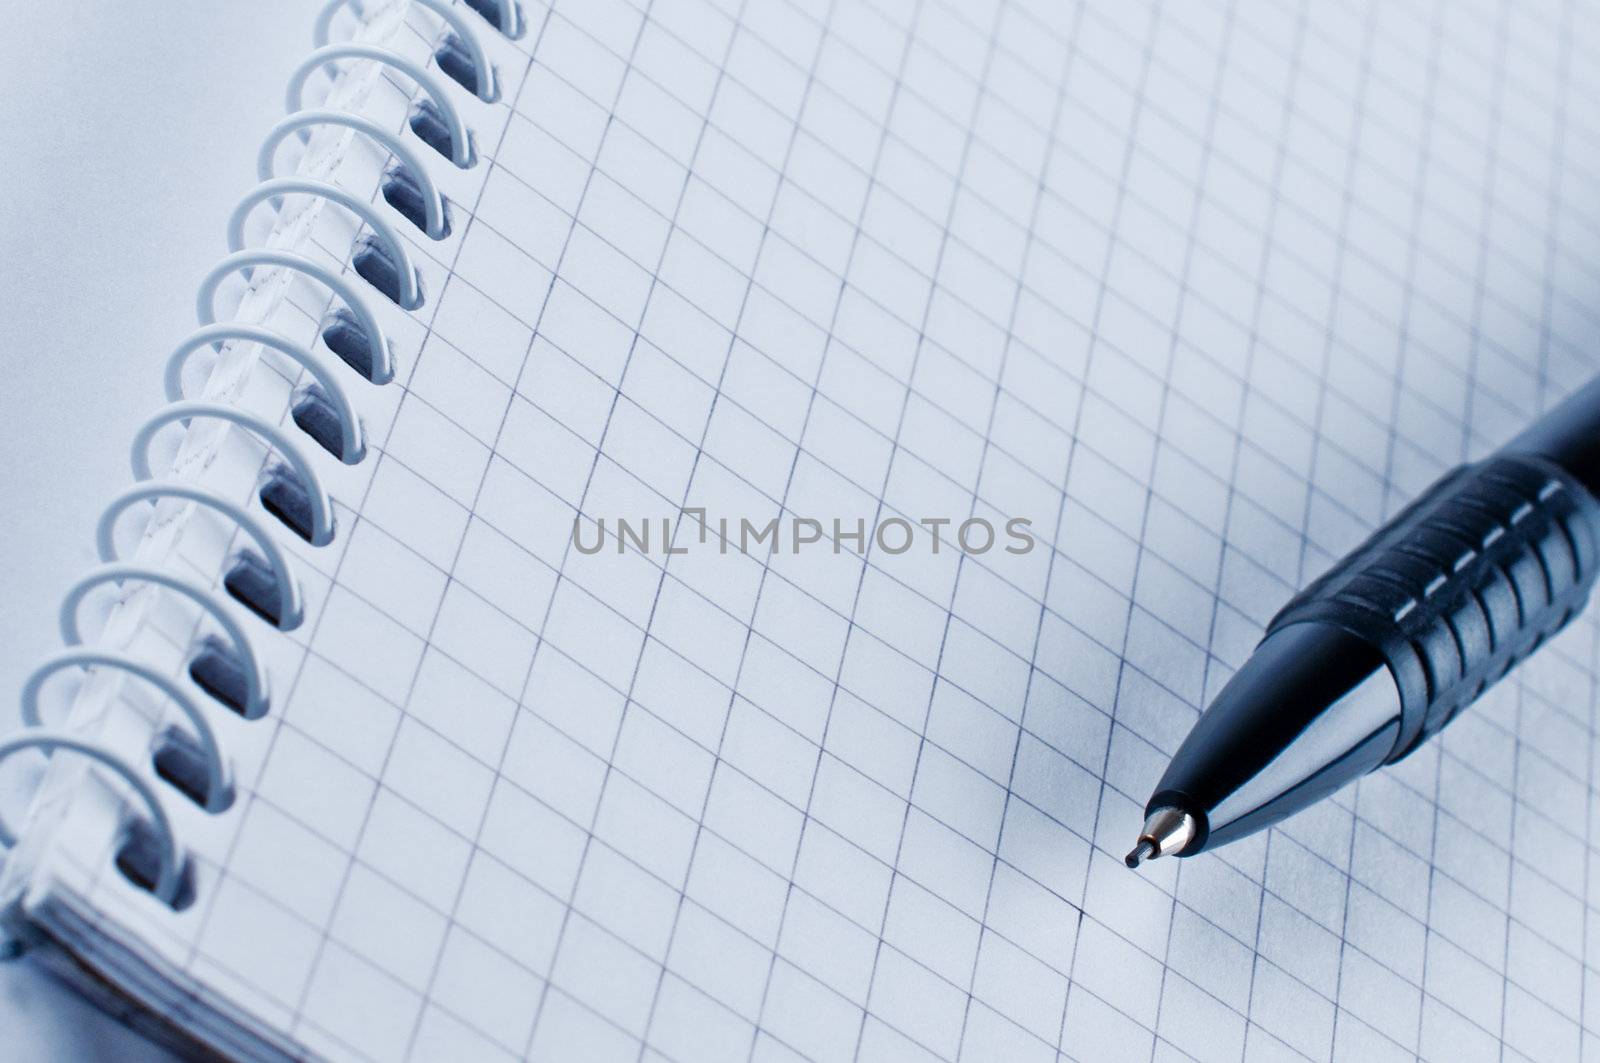 Black pencil on open white paper notebook